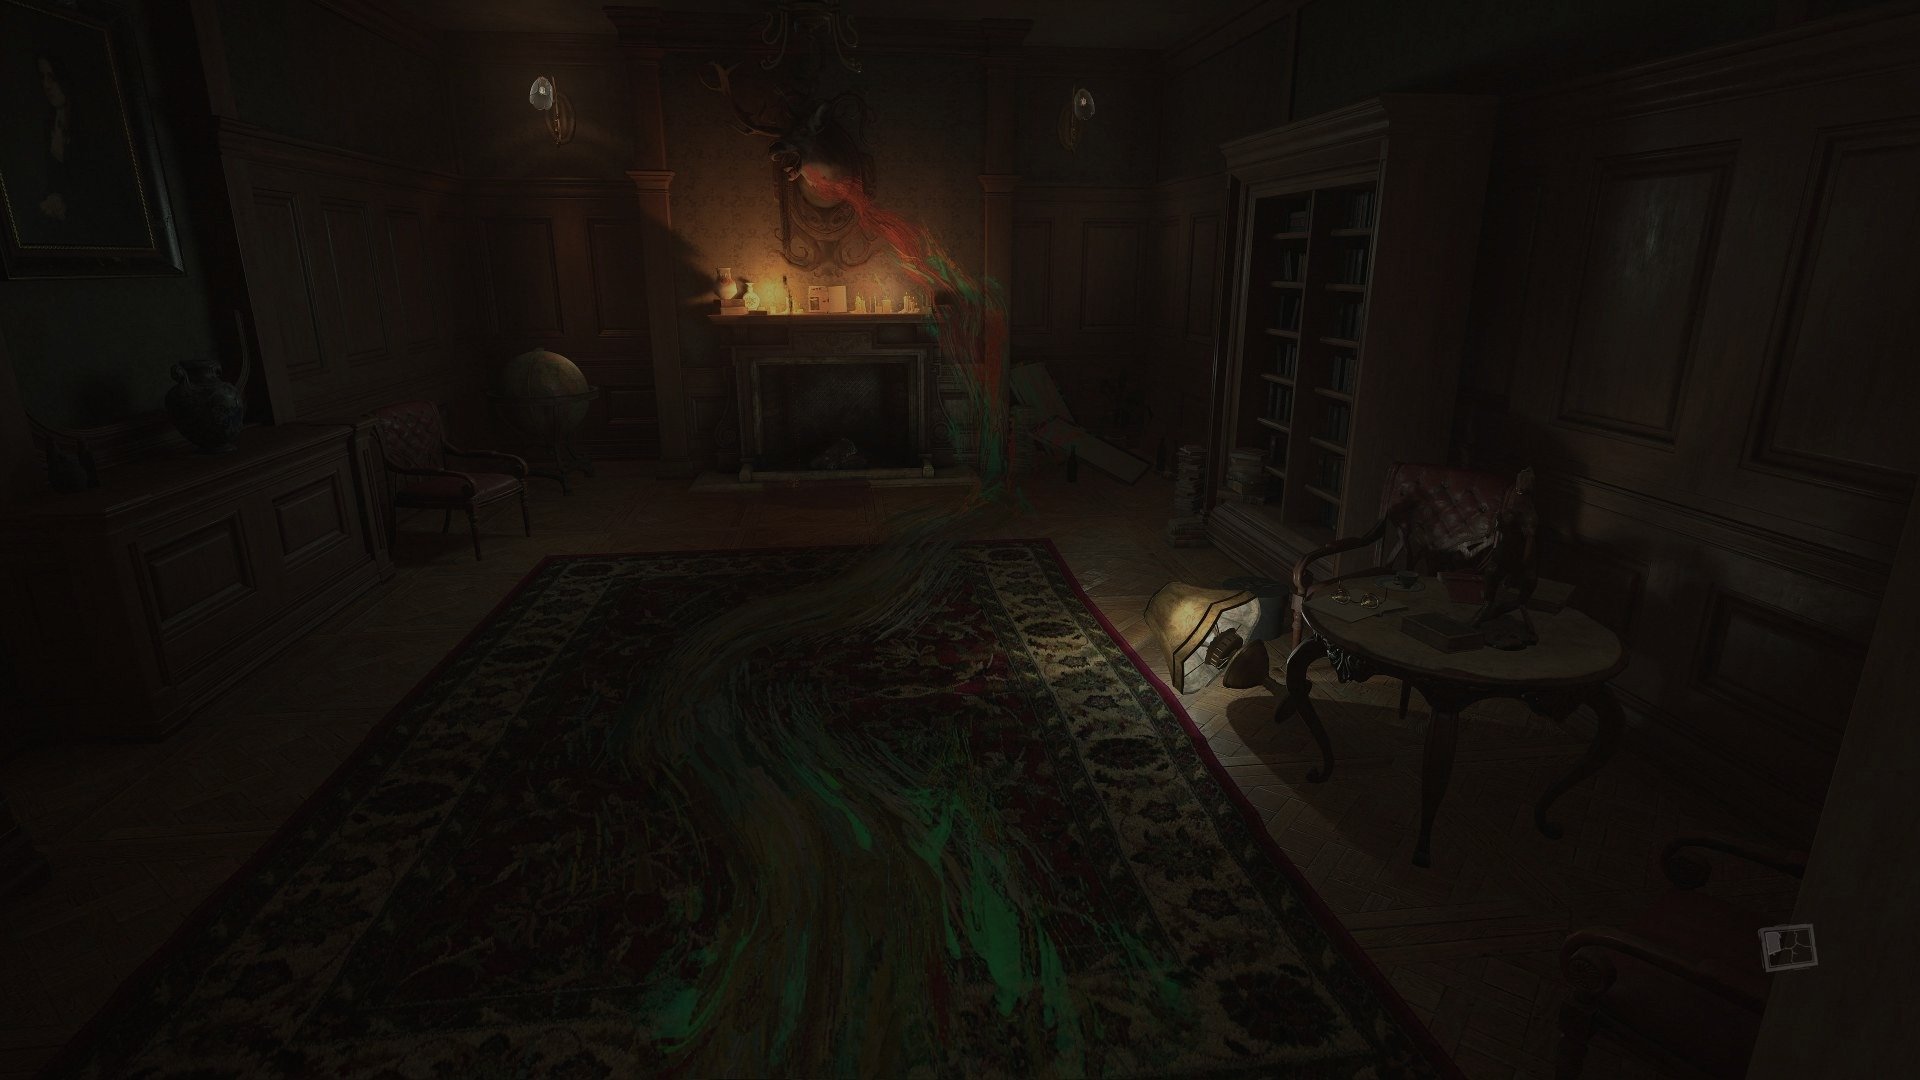 Layers Of Fear: Inheritance DLC Review –